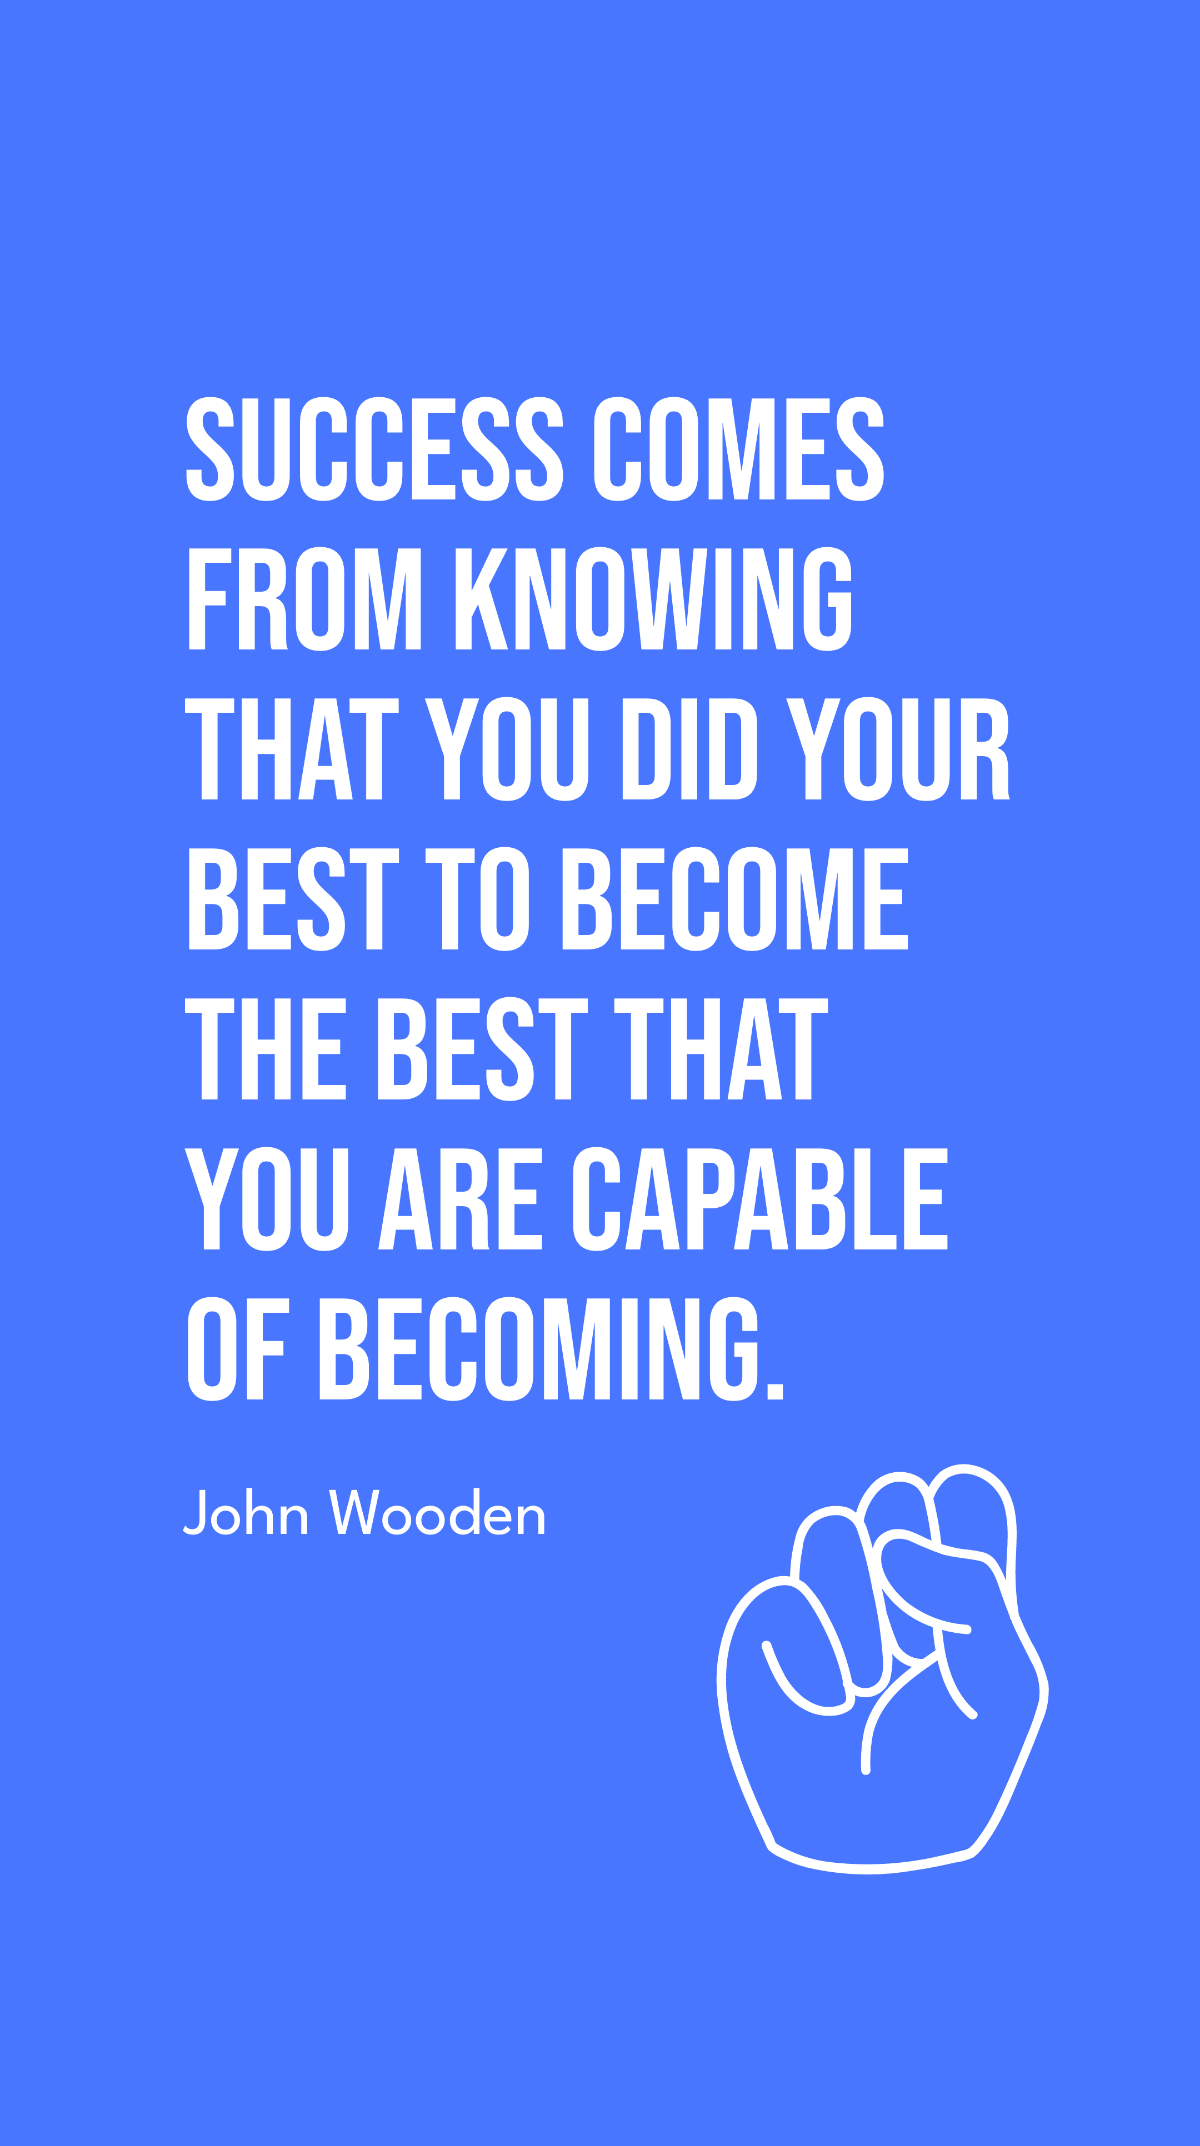 John Wooden - Success comes from knowing that you did your best to become the best that you are capable of becoming.